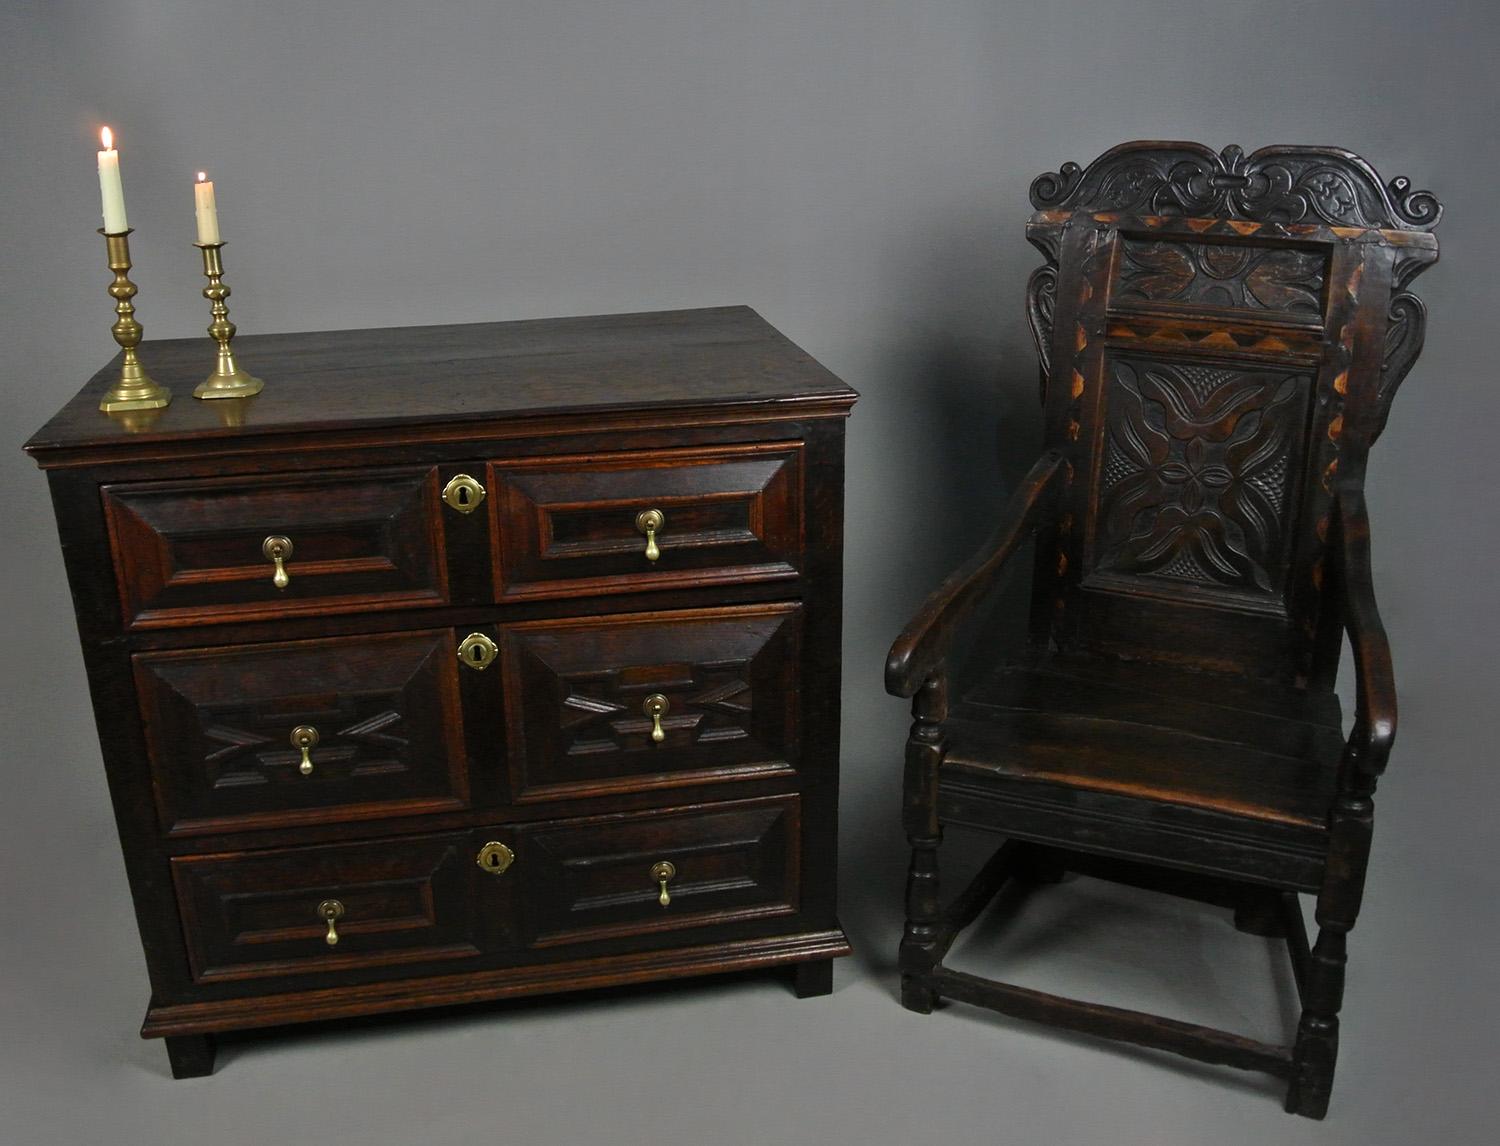 Charles II Oak Chest of Drawers with Original Handles c. 1670 For Sale 4